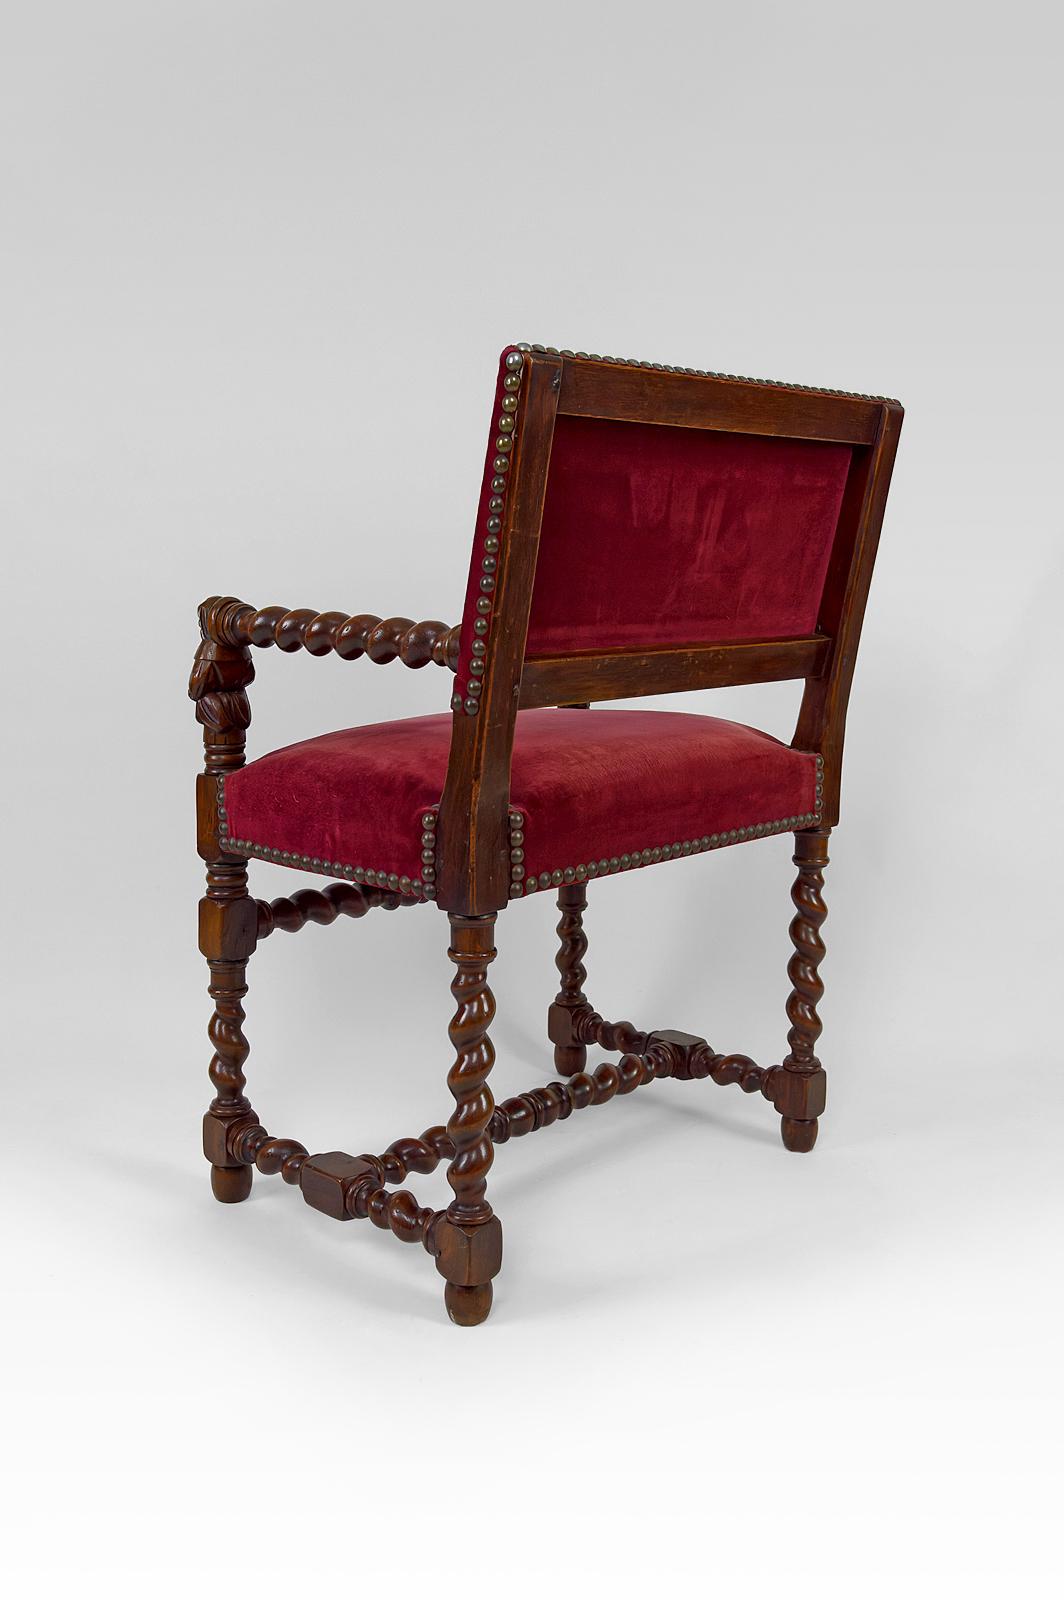 Carved Louis XIII / Haute Epoque style armchair with women sculpted on the armrests. For Sale